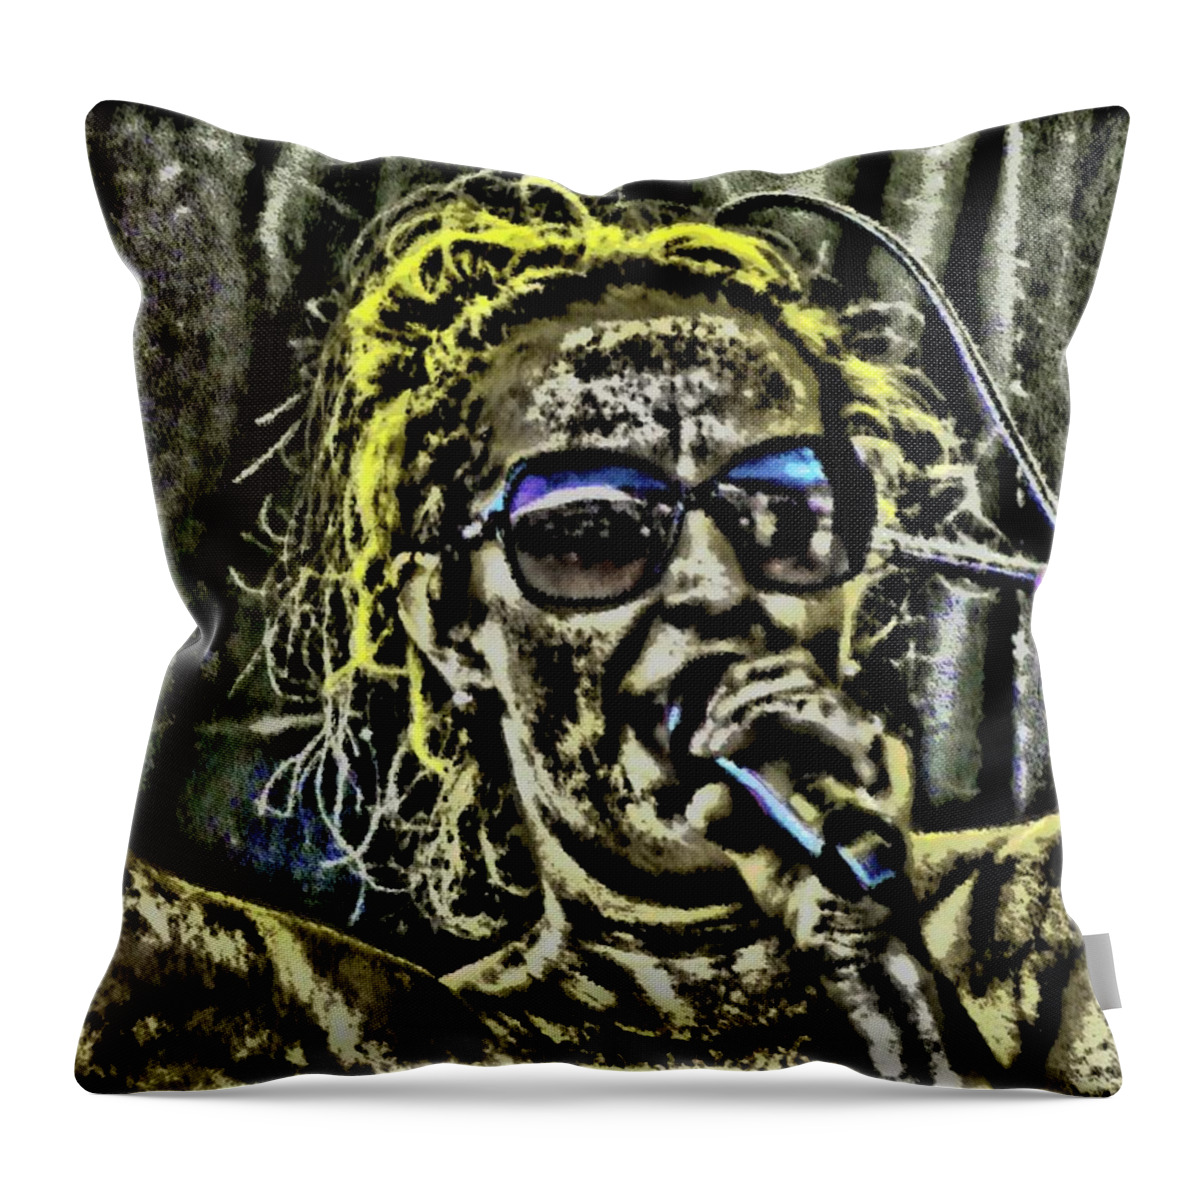 Woman Throw Pillow featuring the digital art Mud Singer by Vincent Green